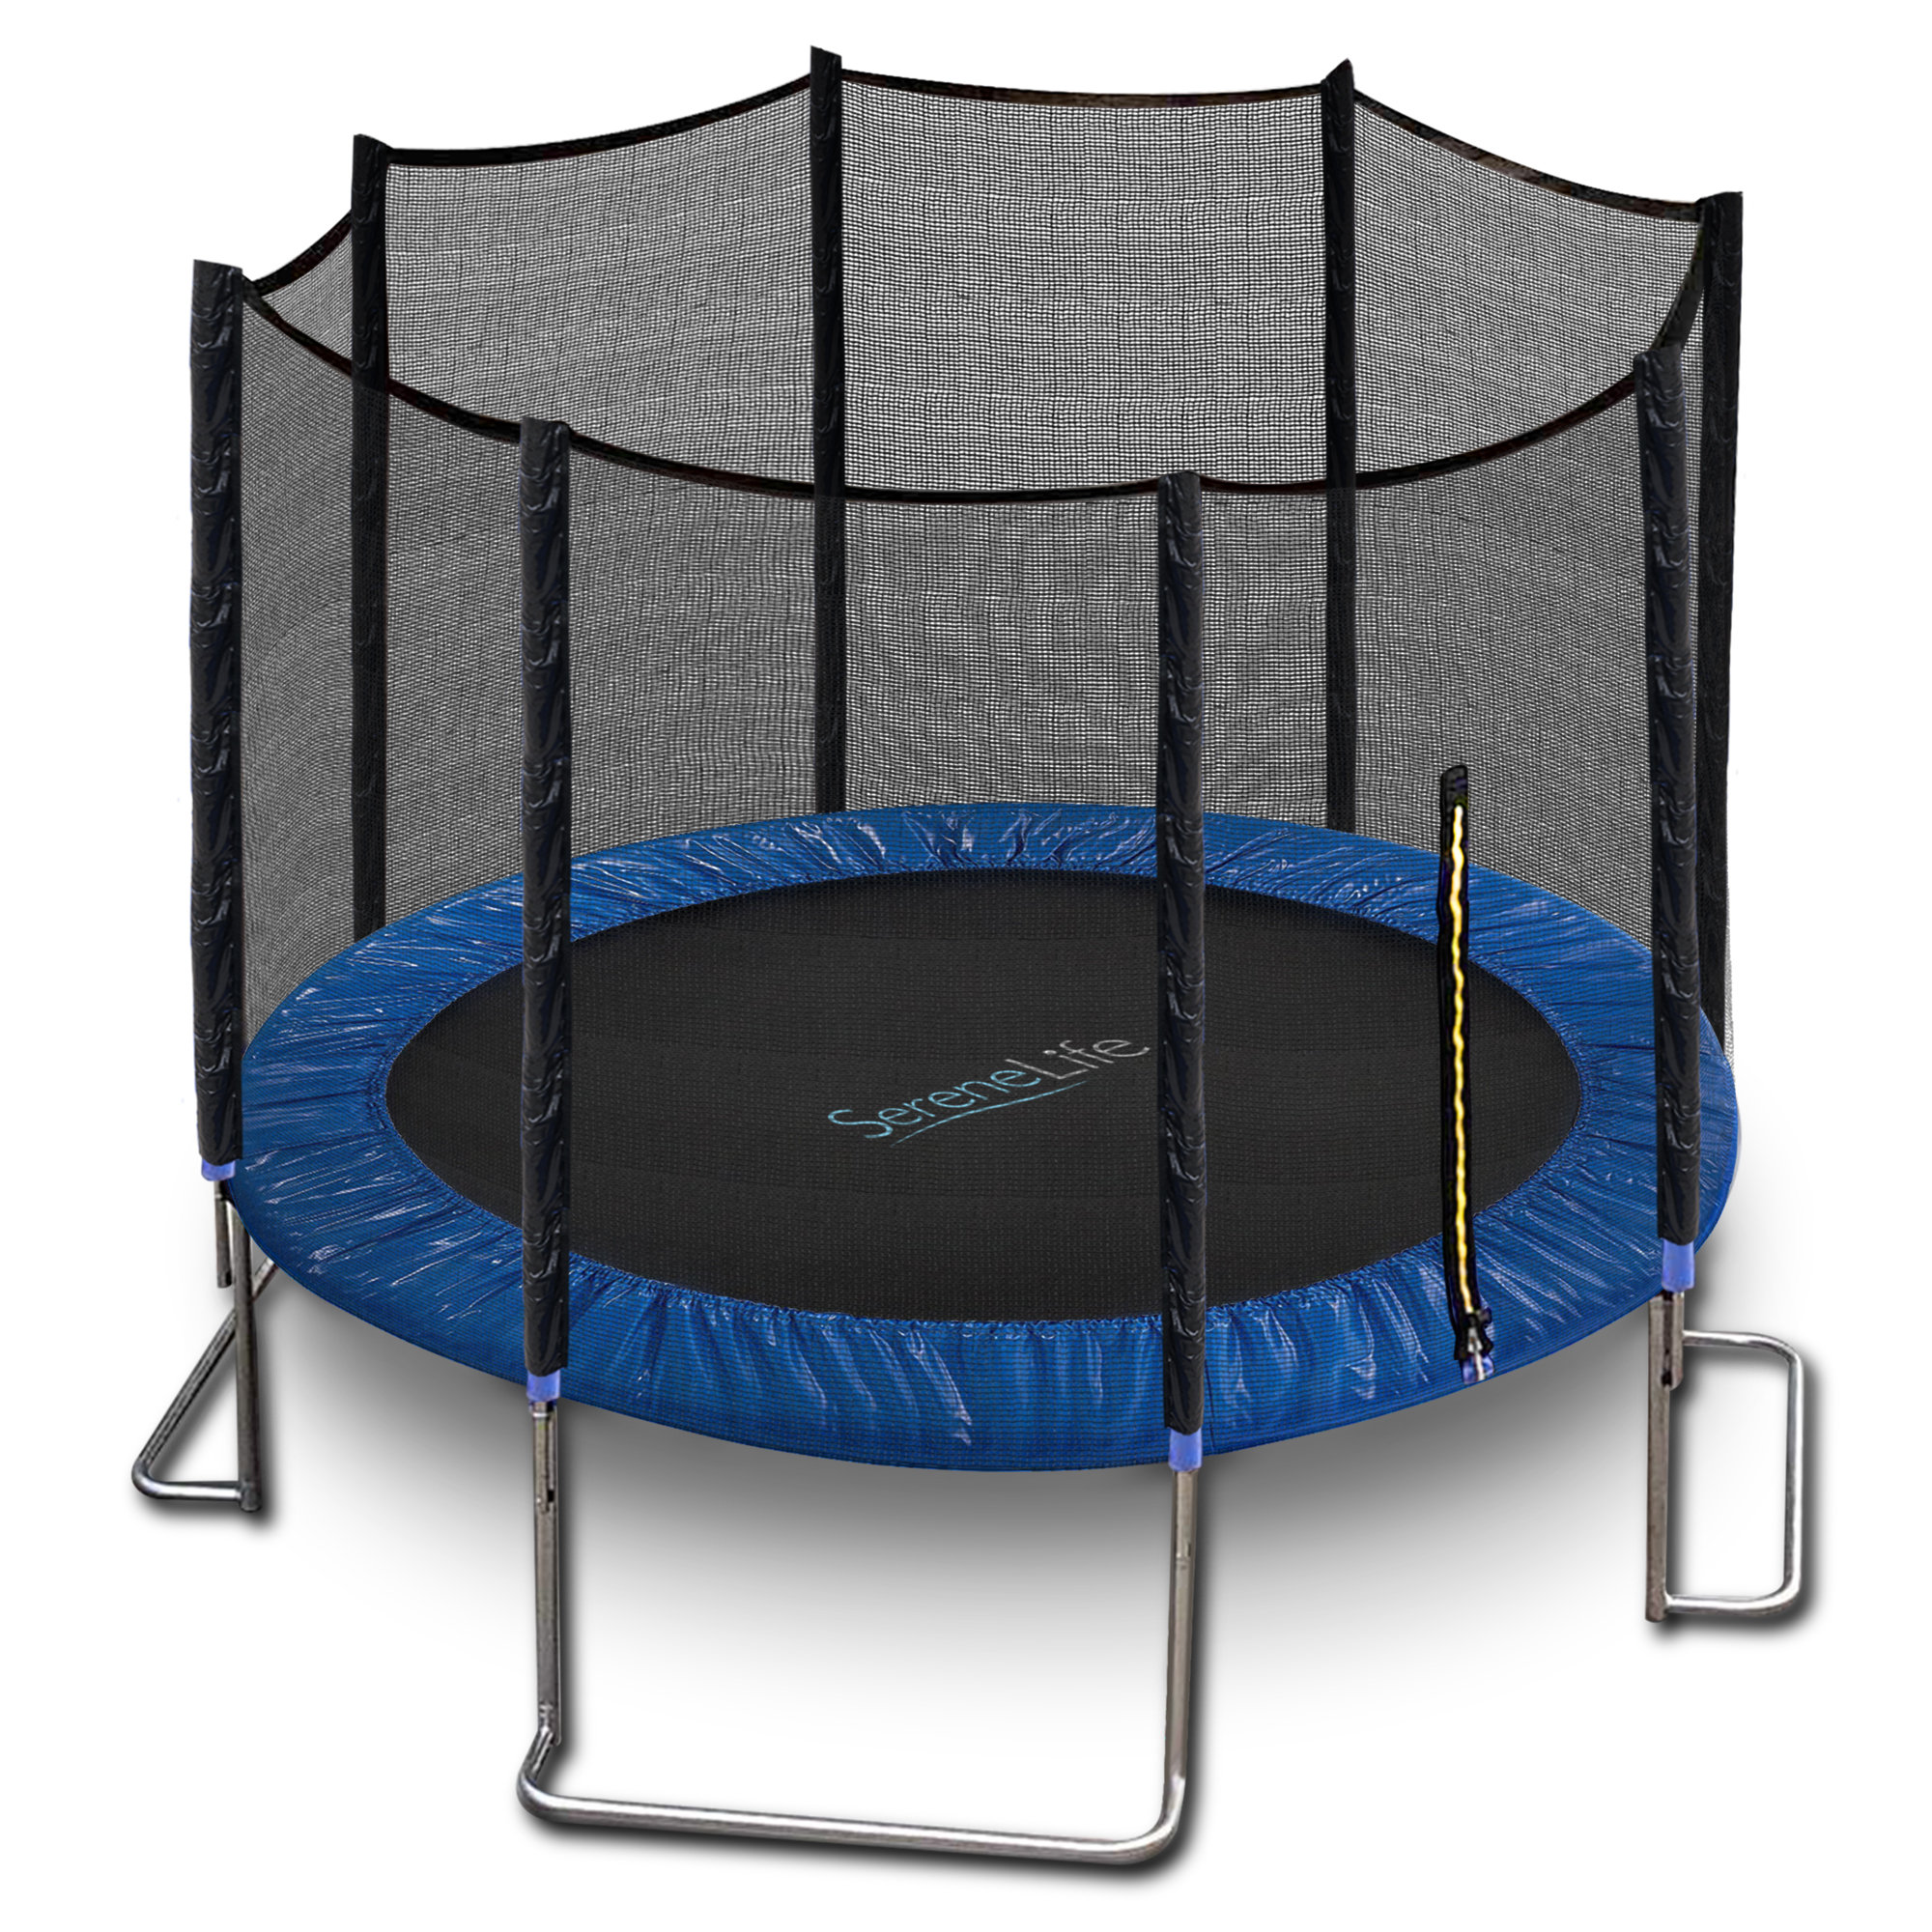 Mathis fiets Kabelbaan SereneLife Home Backyard Sports Trampoline - Large Outdoor Jumping Fun  Trampoline For Kids / Children, Safety Net Cage (10' Ft.) | Wayfair